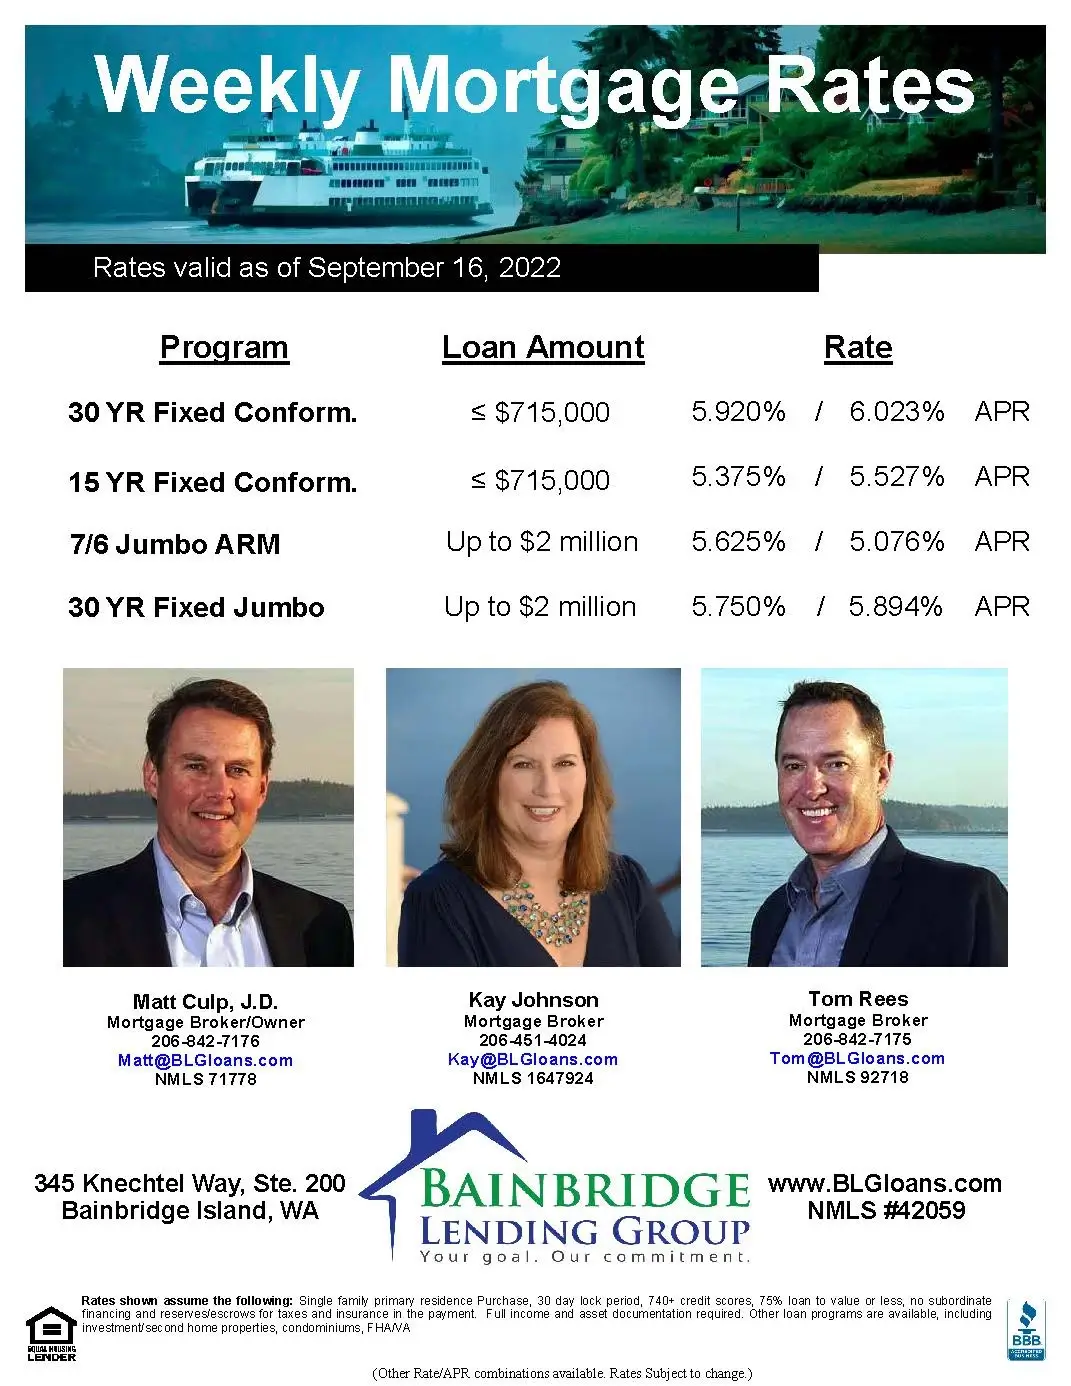 Weekly Rate Update for September 16, 2022